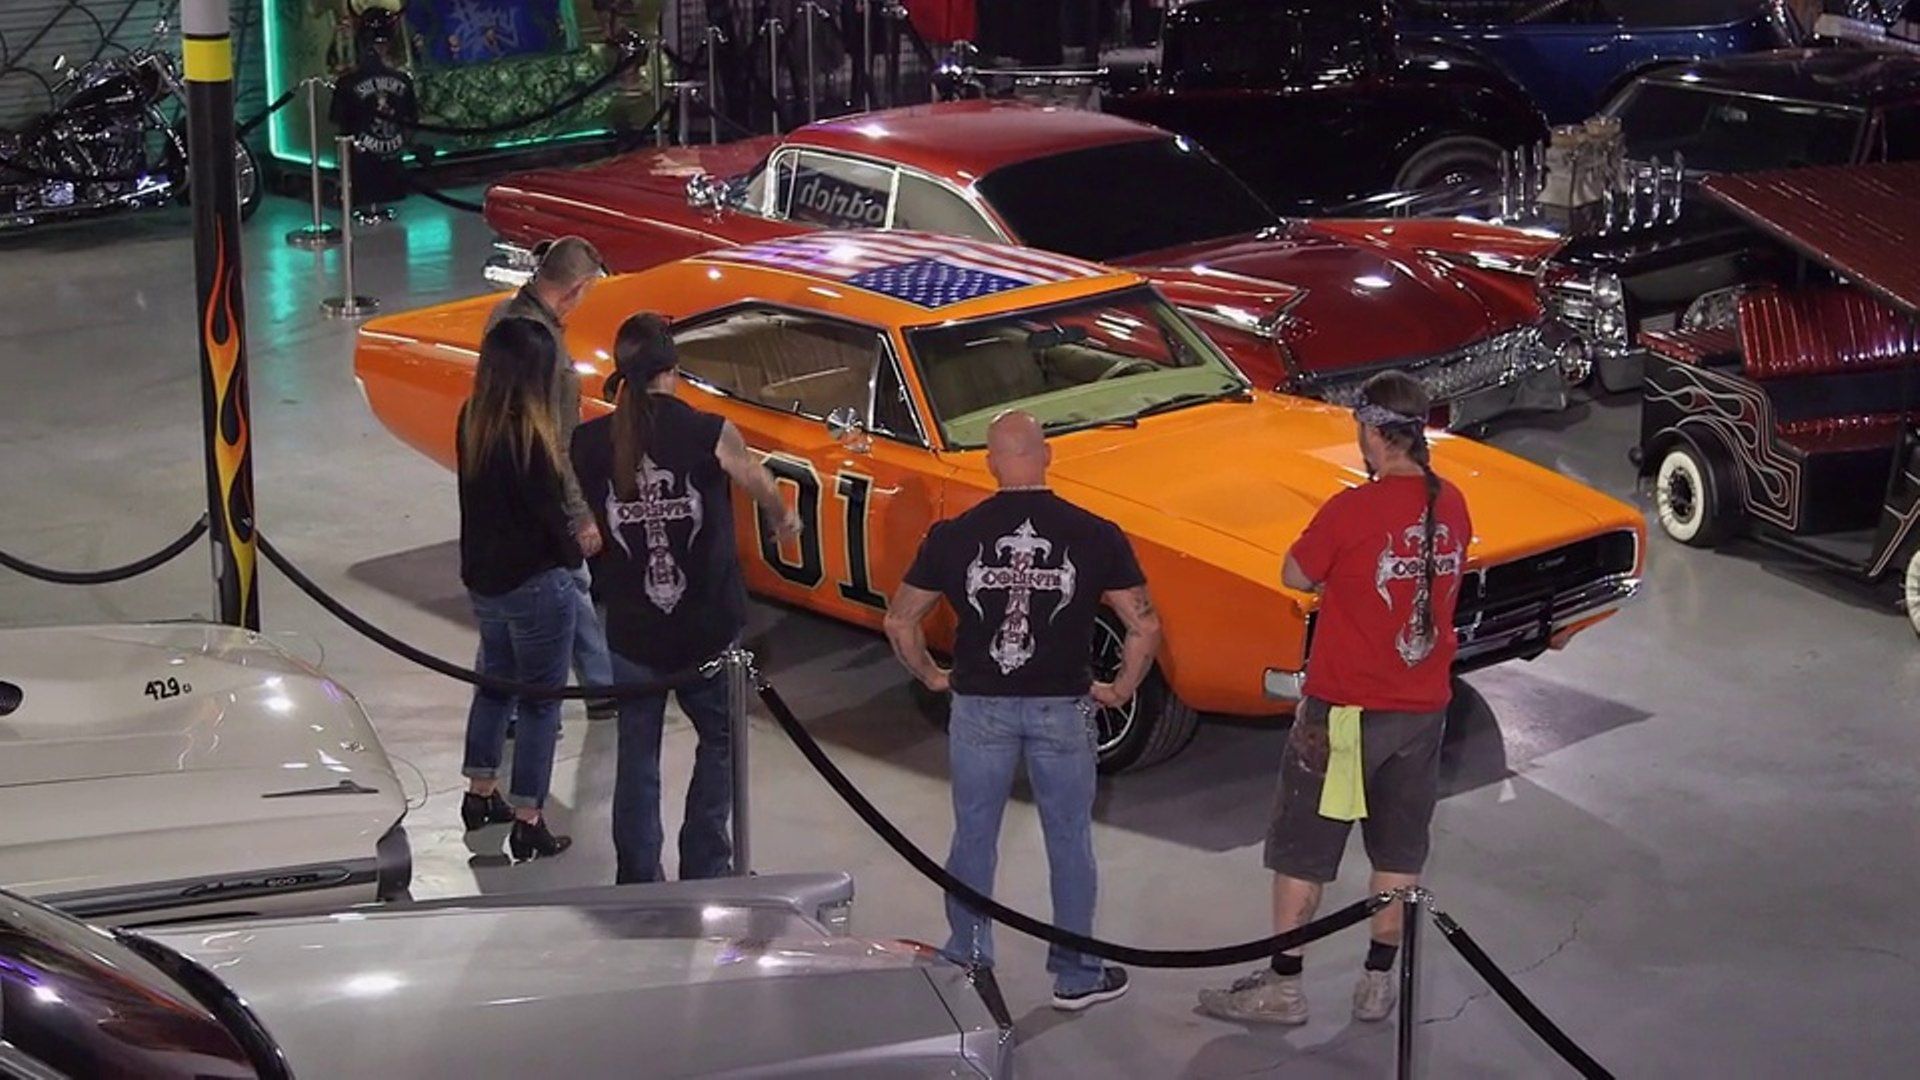 Counting Cars Crew admiring a car